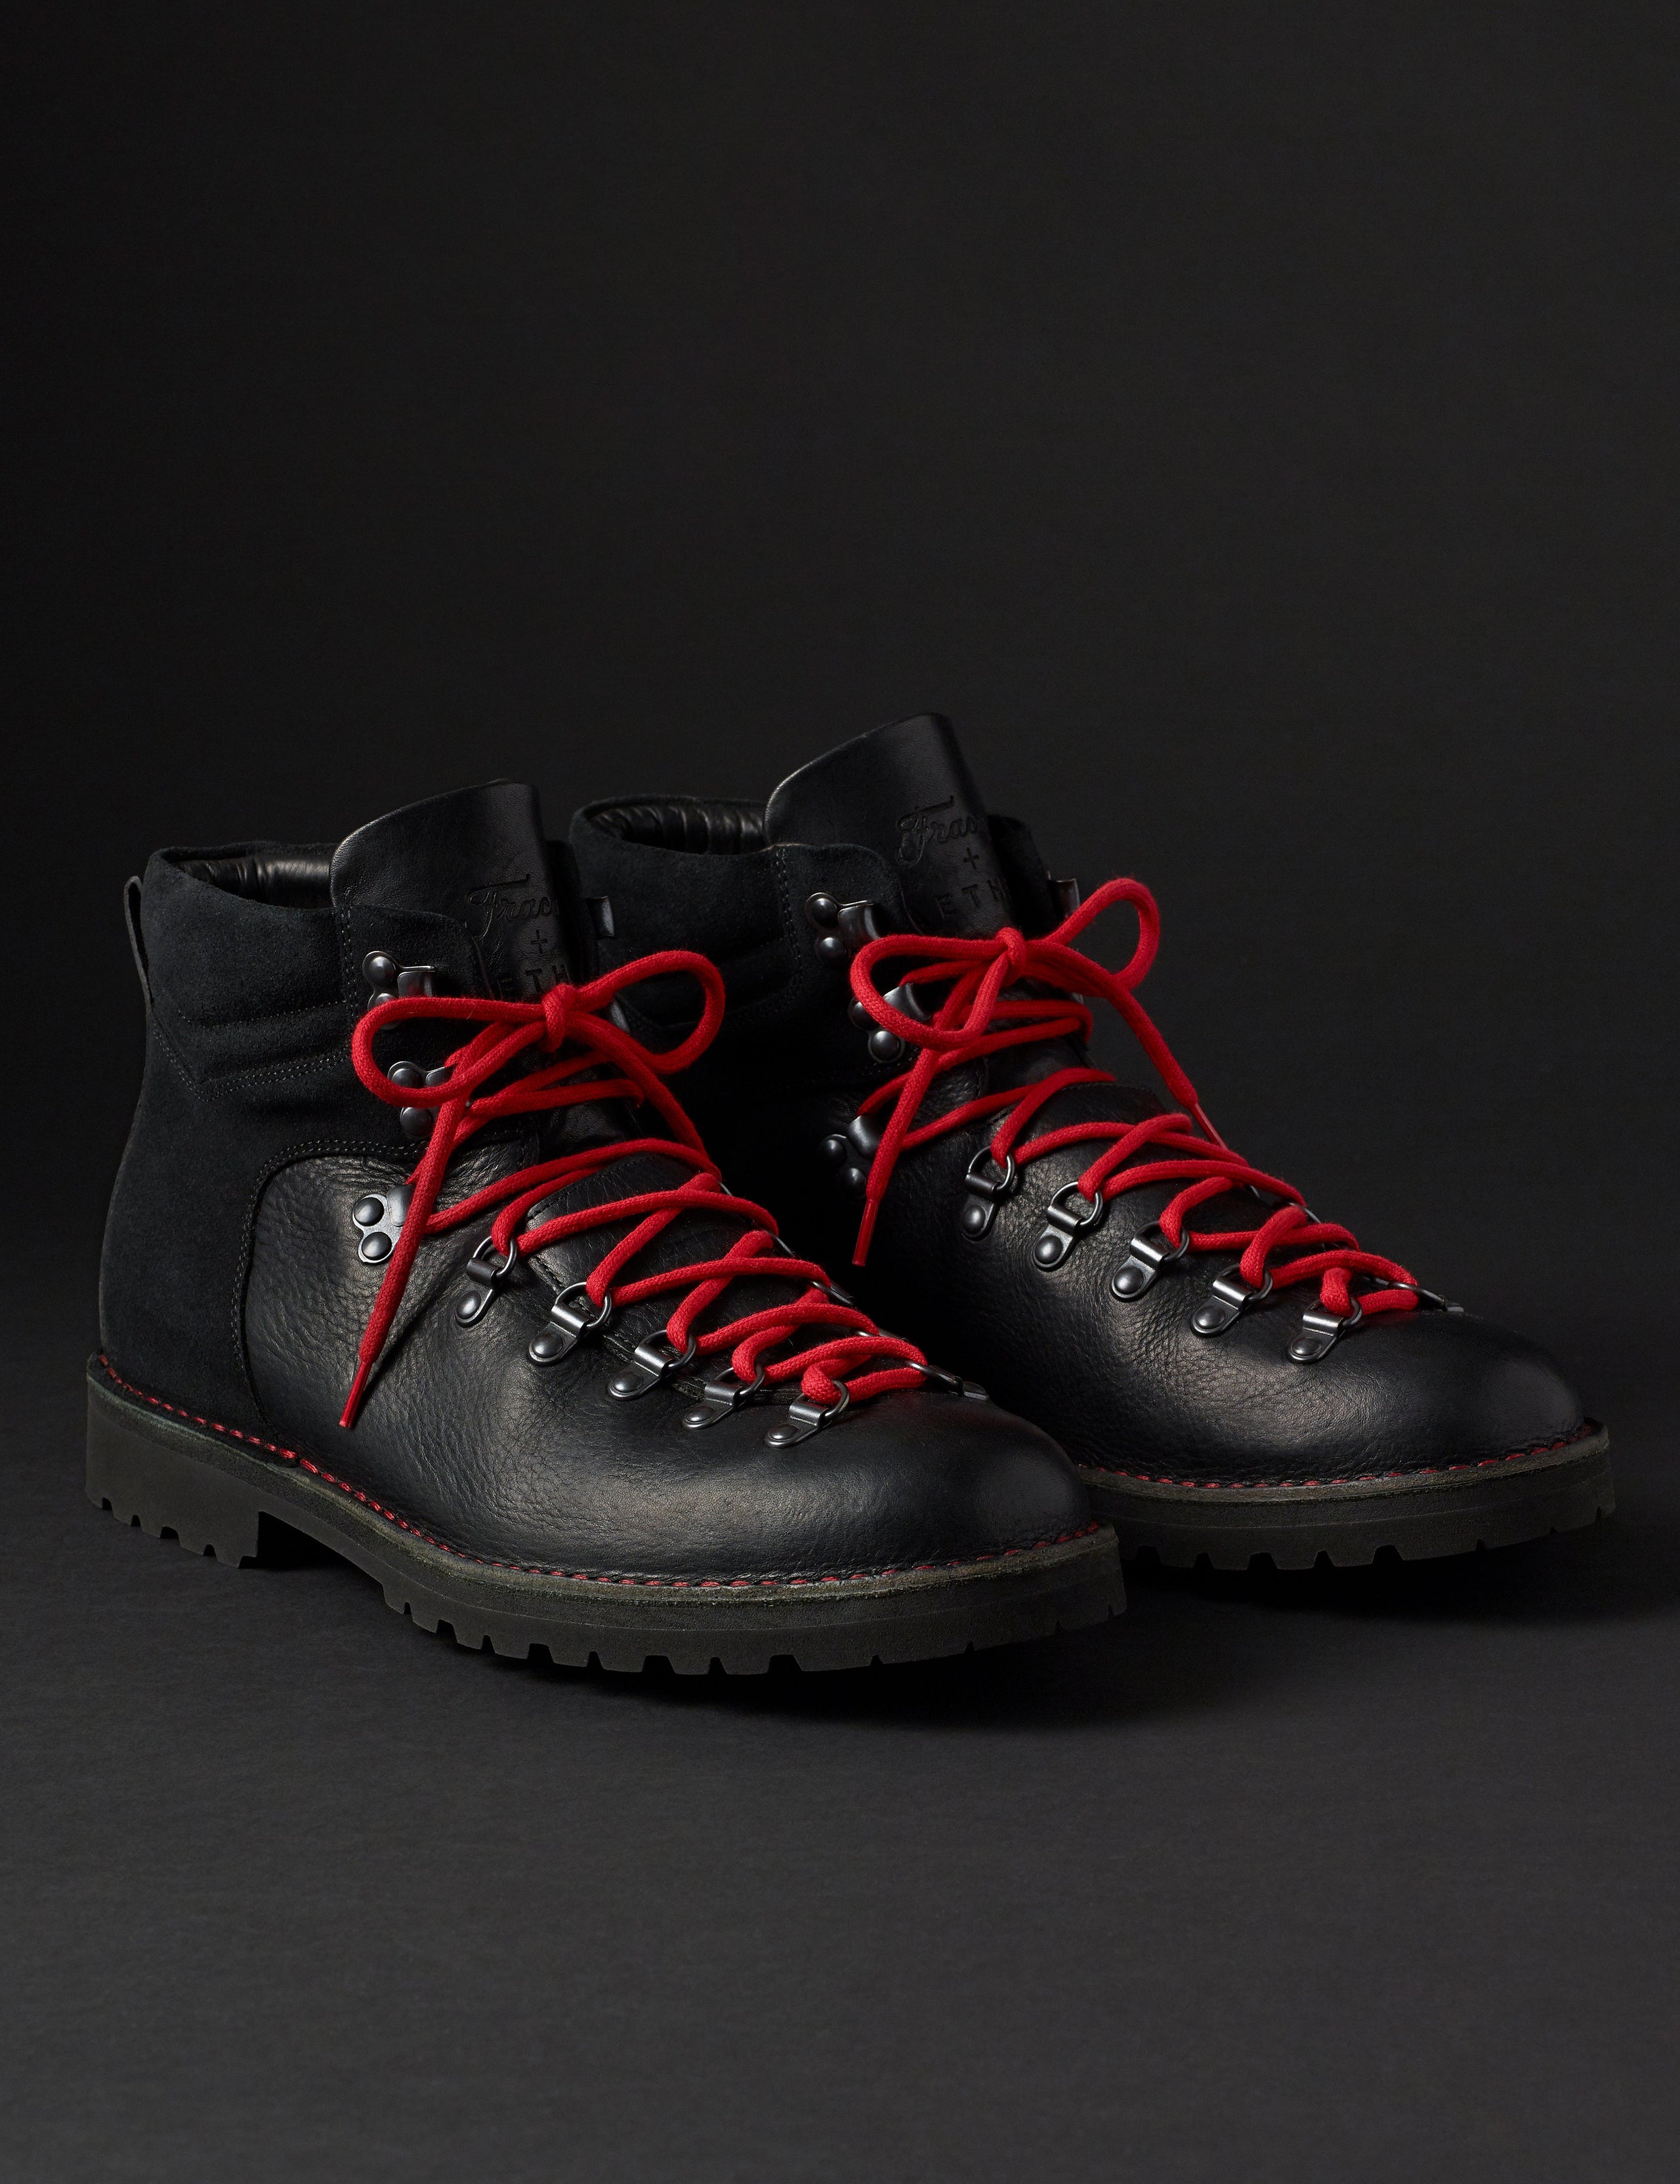 black dolomite boot for men from Aether Apparel